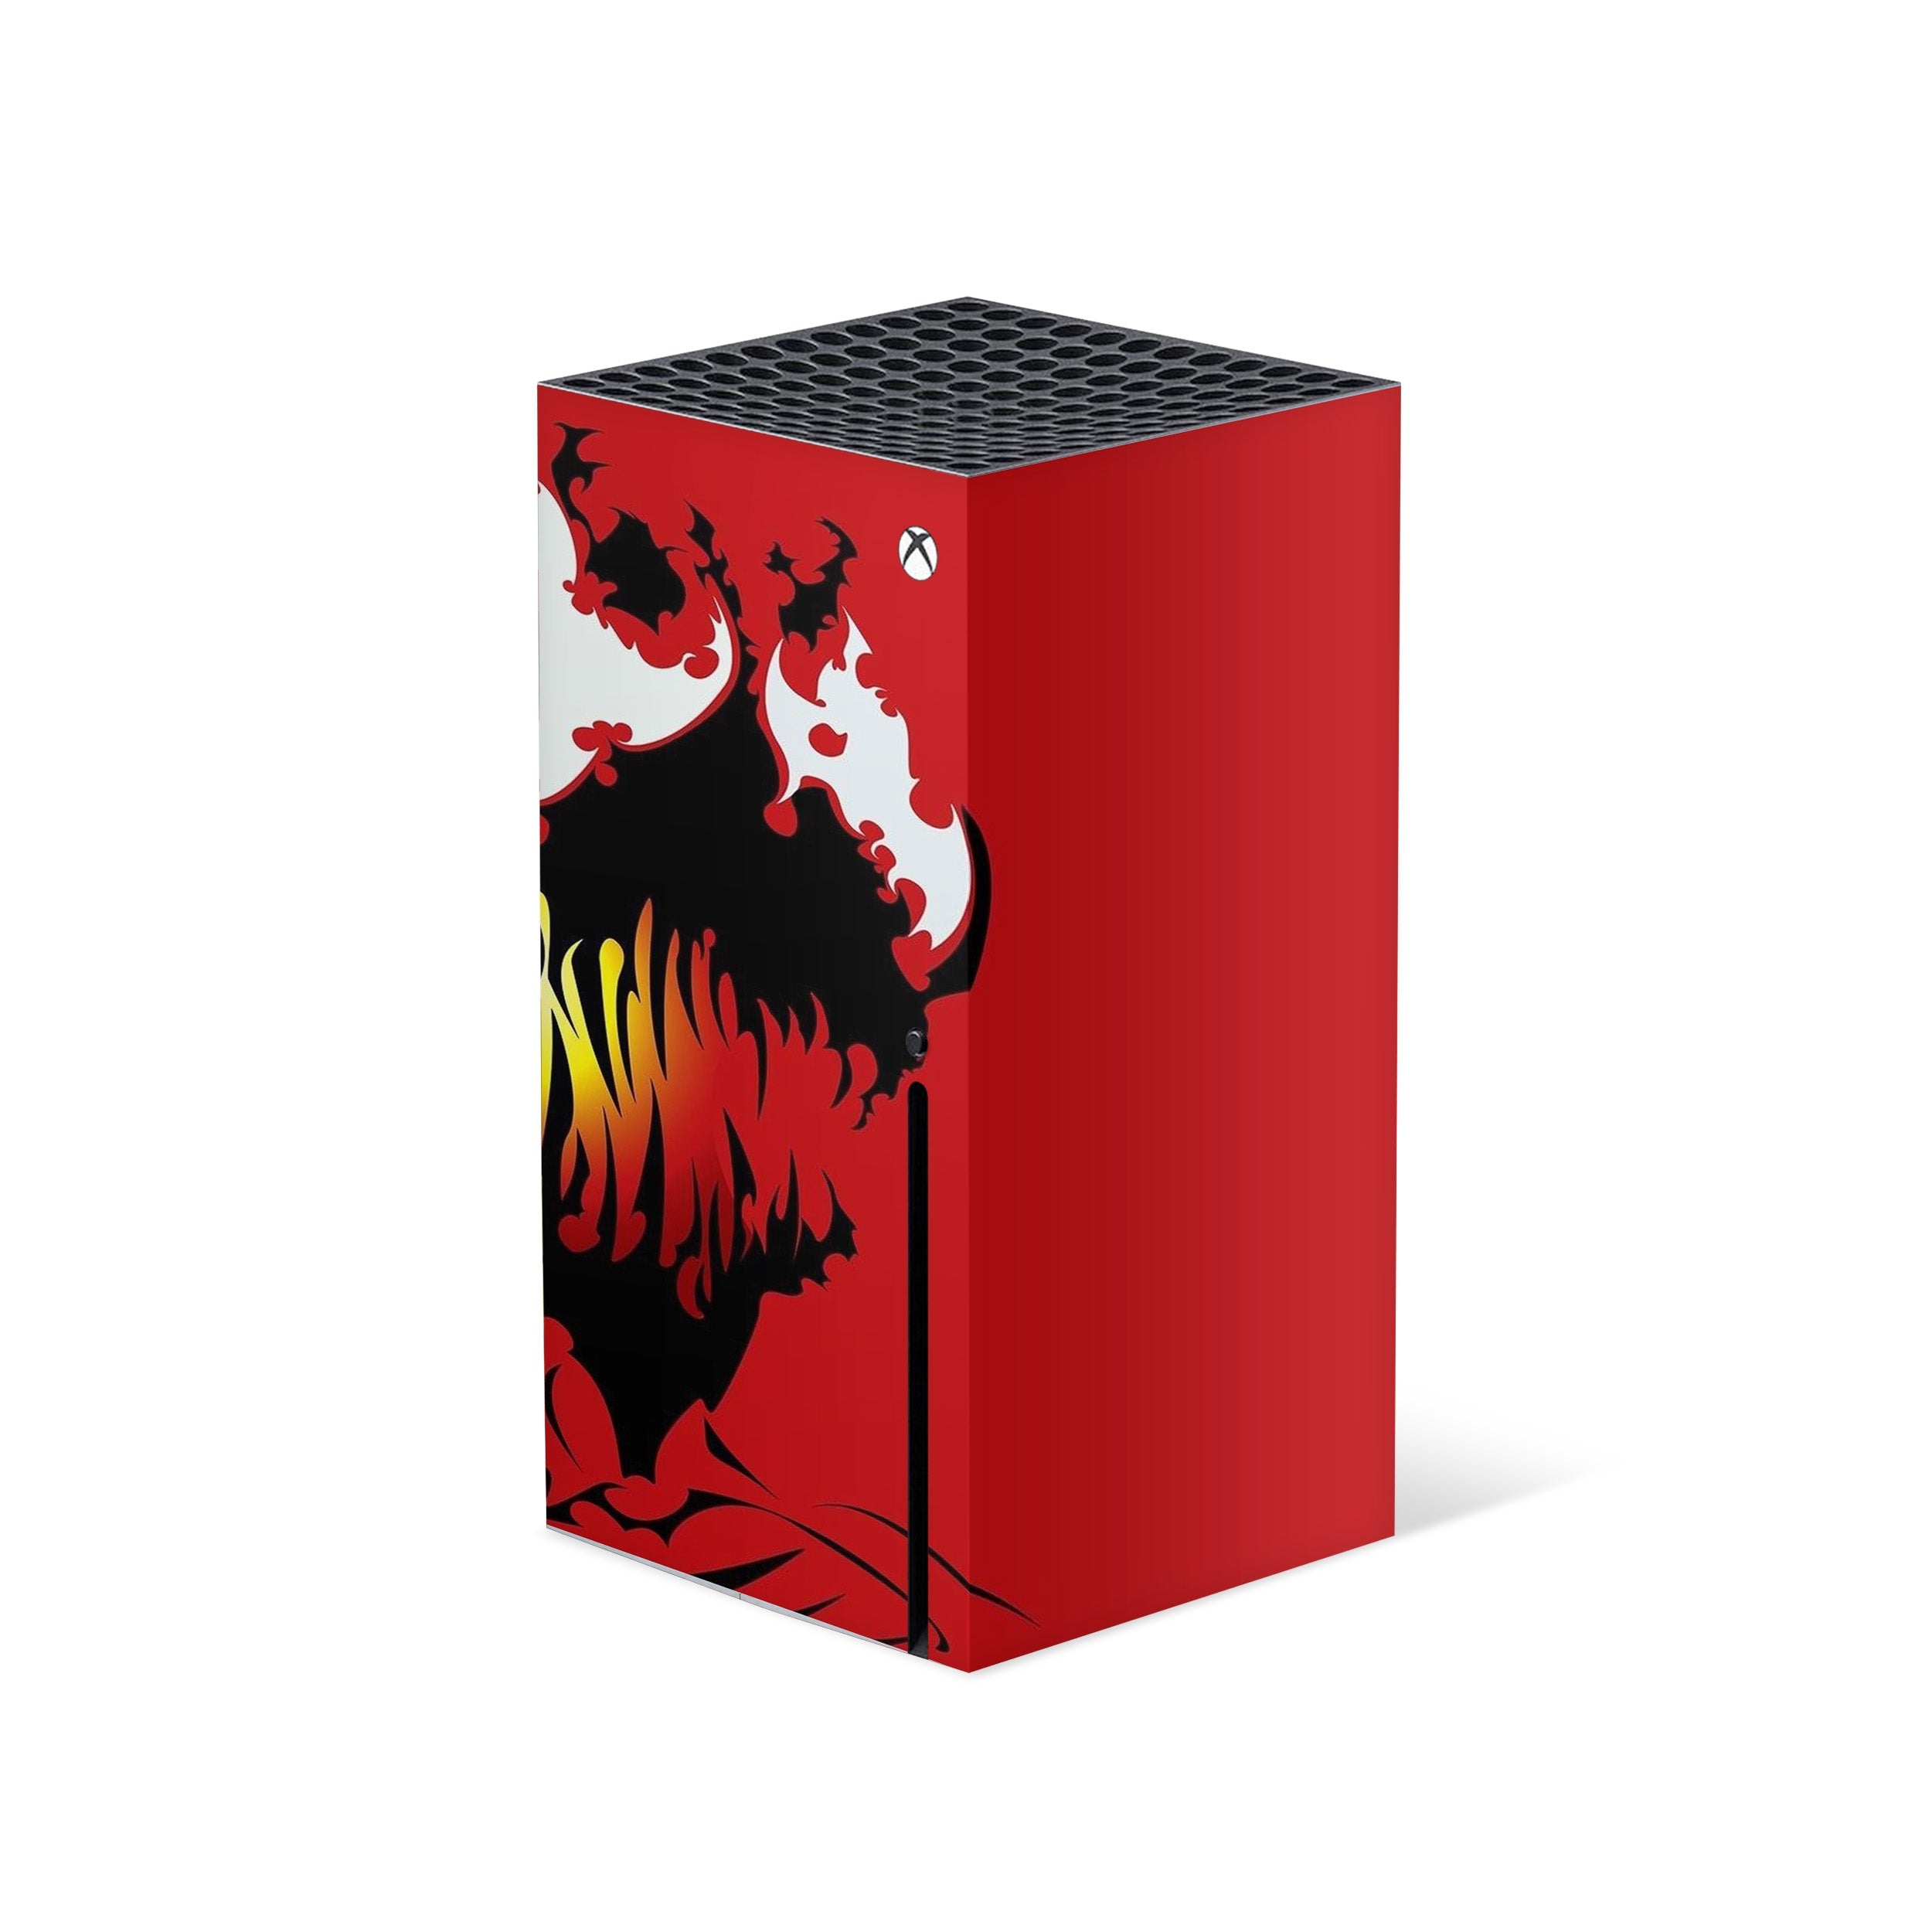 A video game skin featuring a Marvel Carnage design for the Xbox Series X.